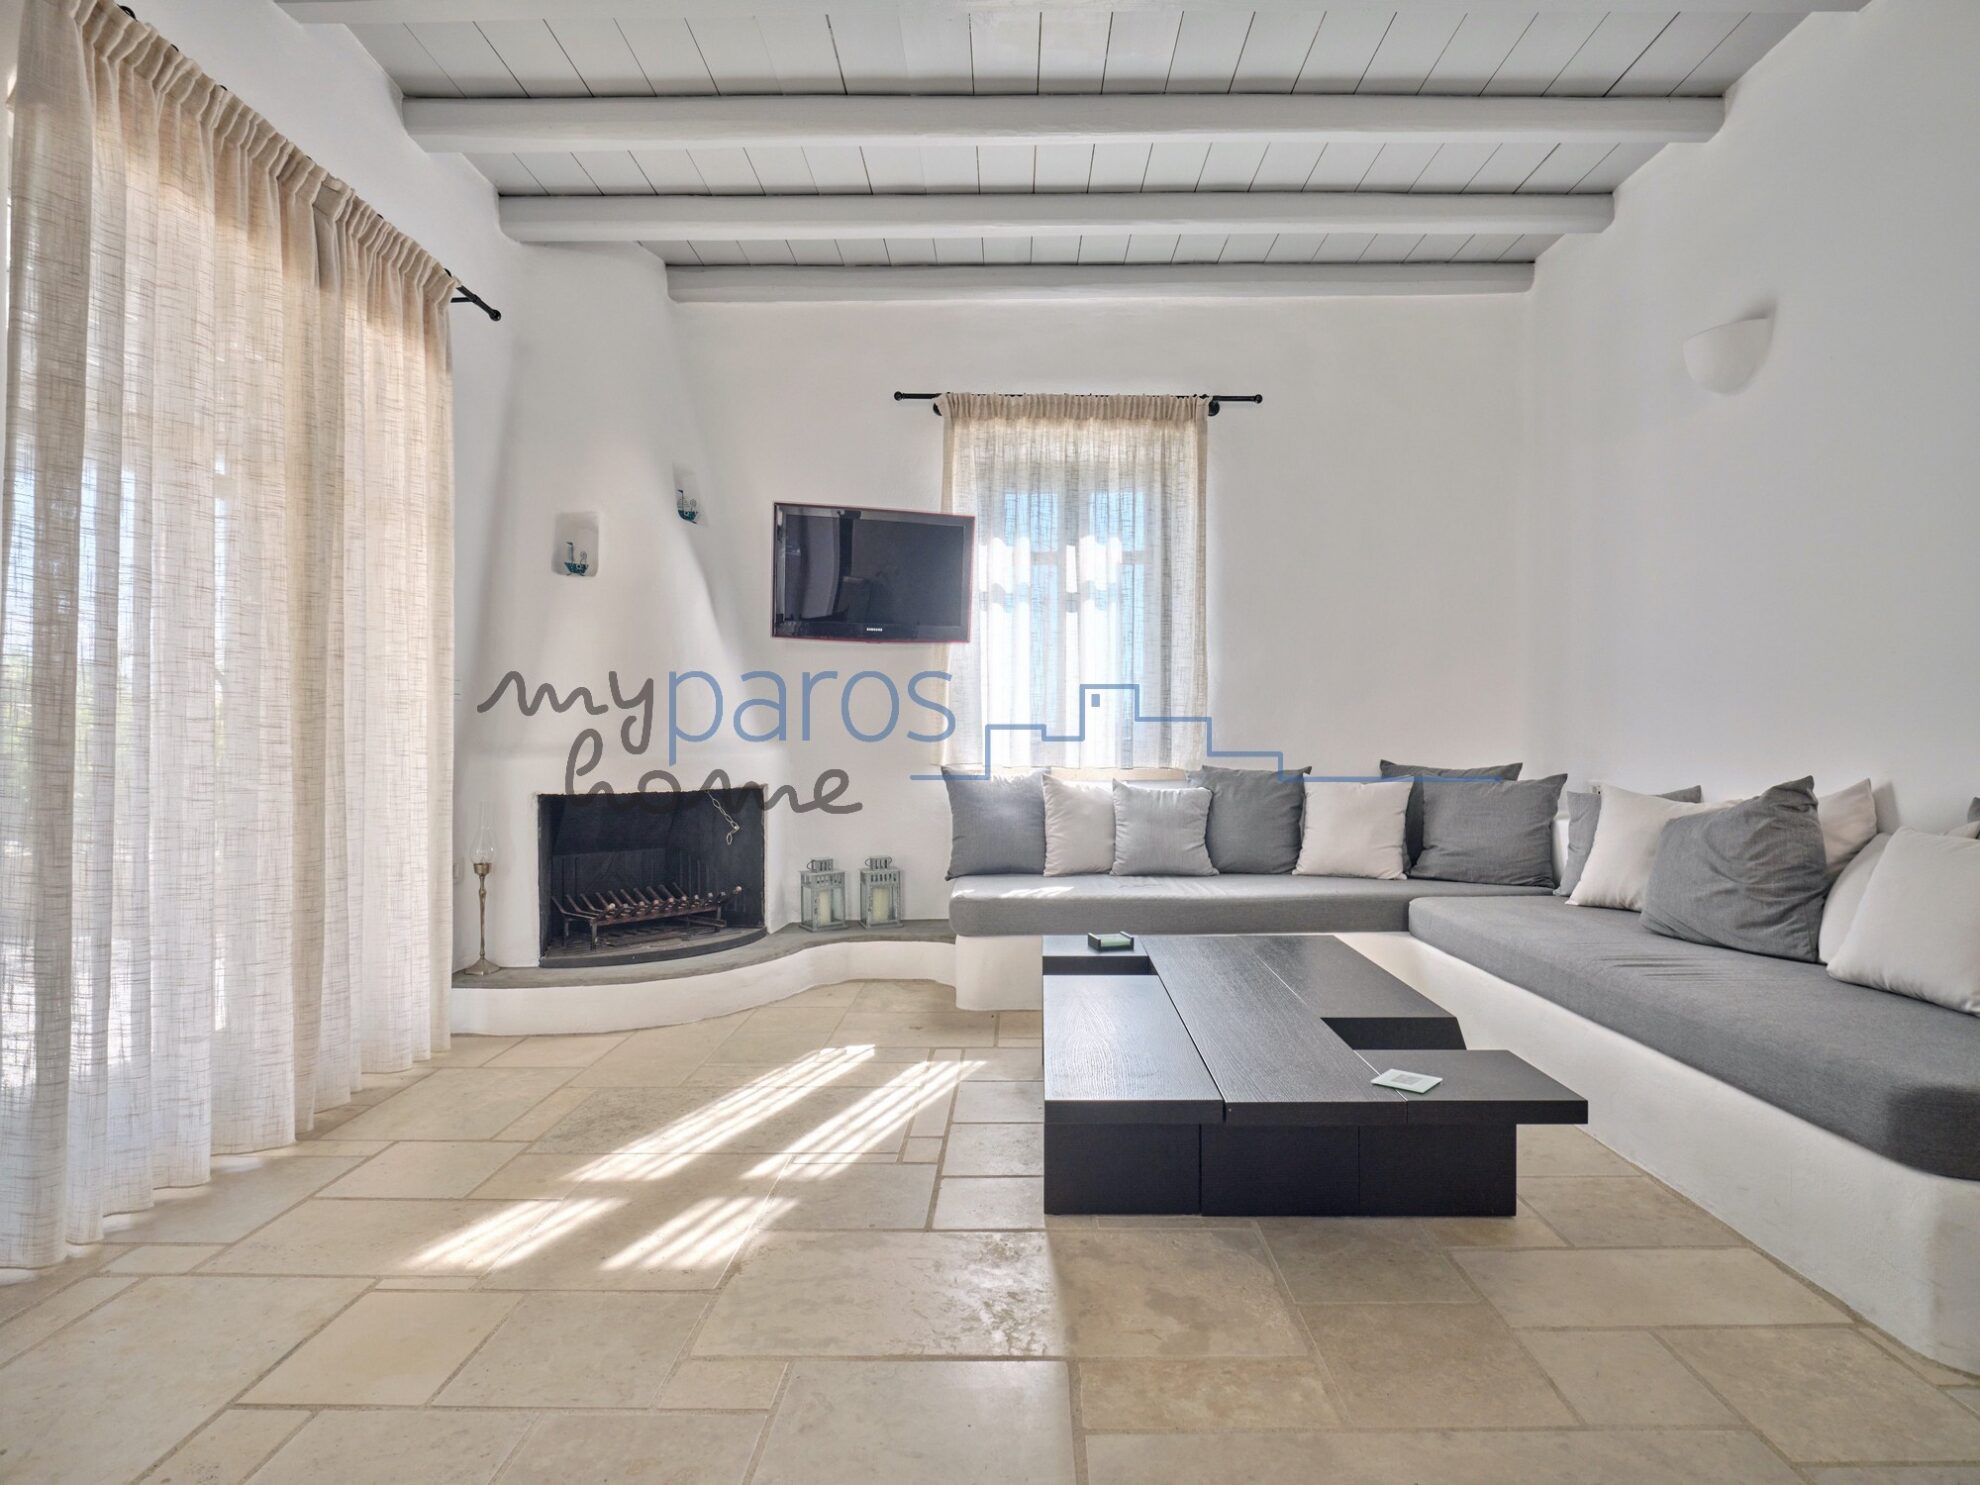 Greece Sotheby's Int. Realty - Paros - Catrice22